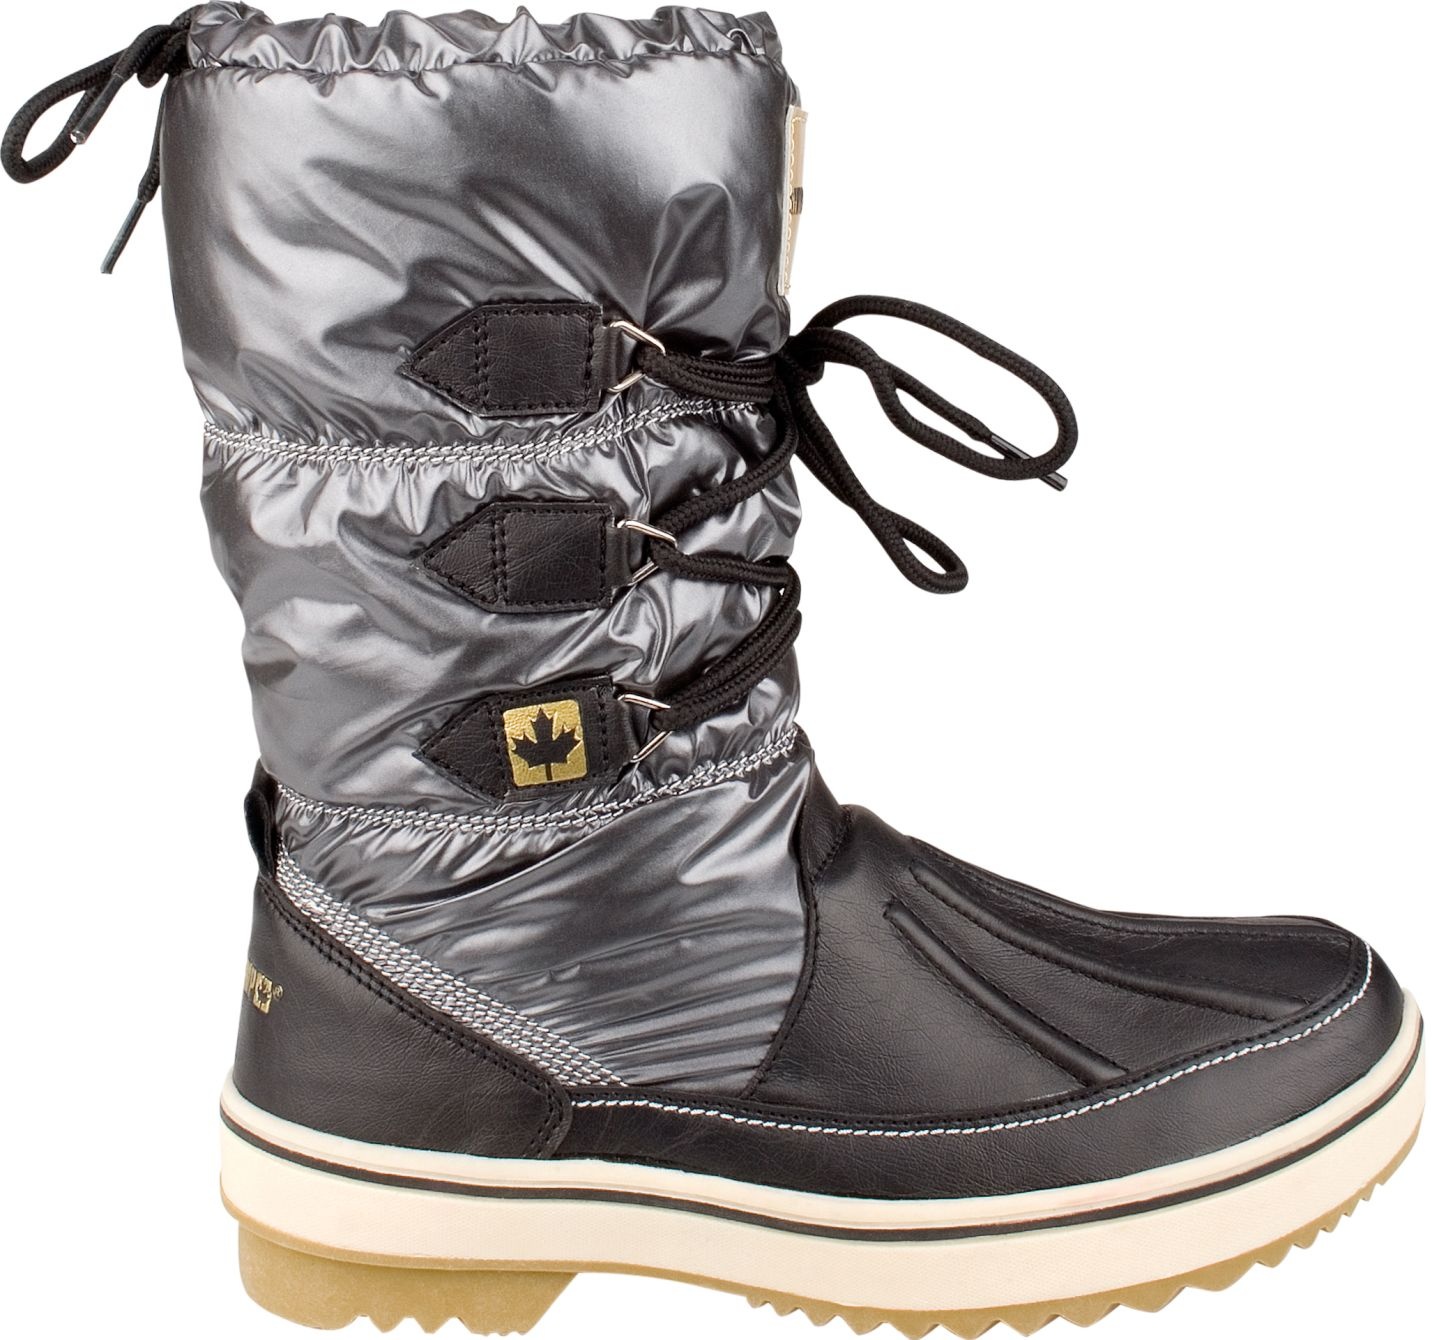 Winter-Grip Snowboots Lace Up 